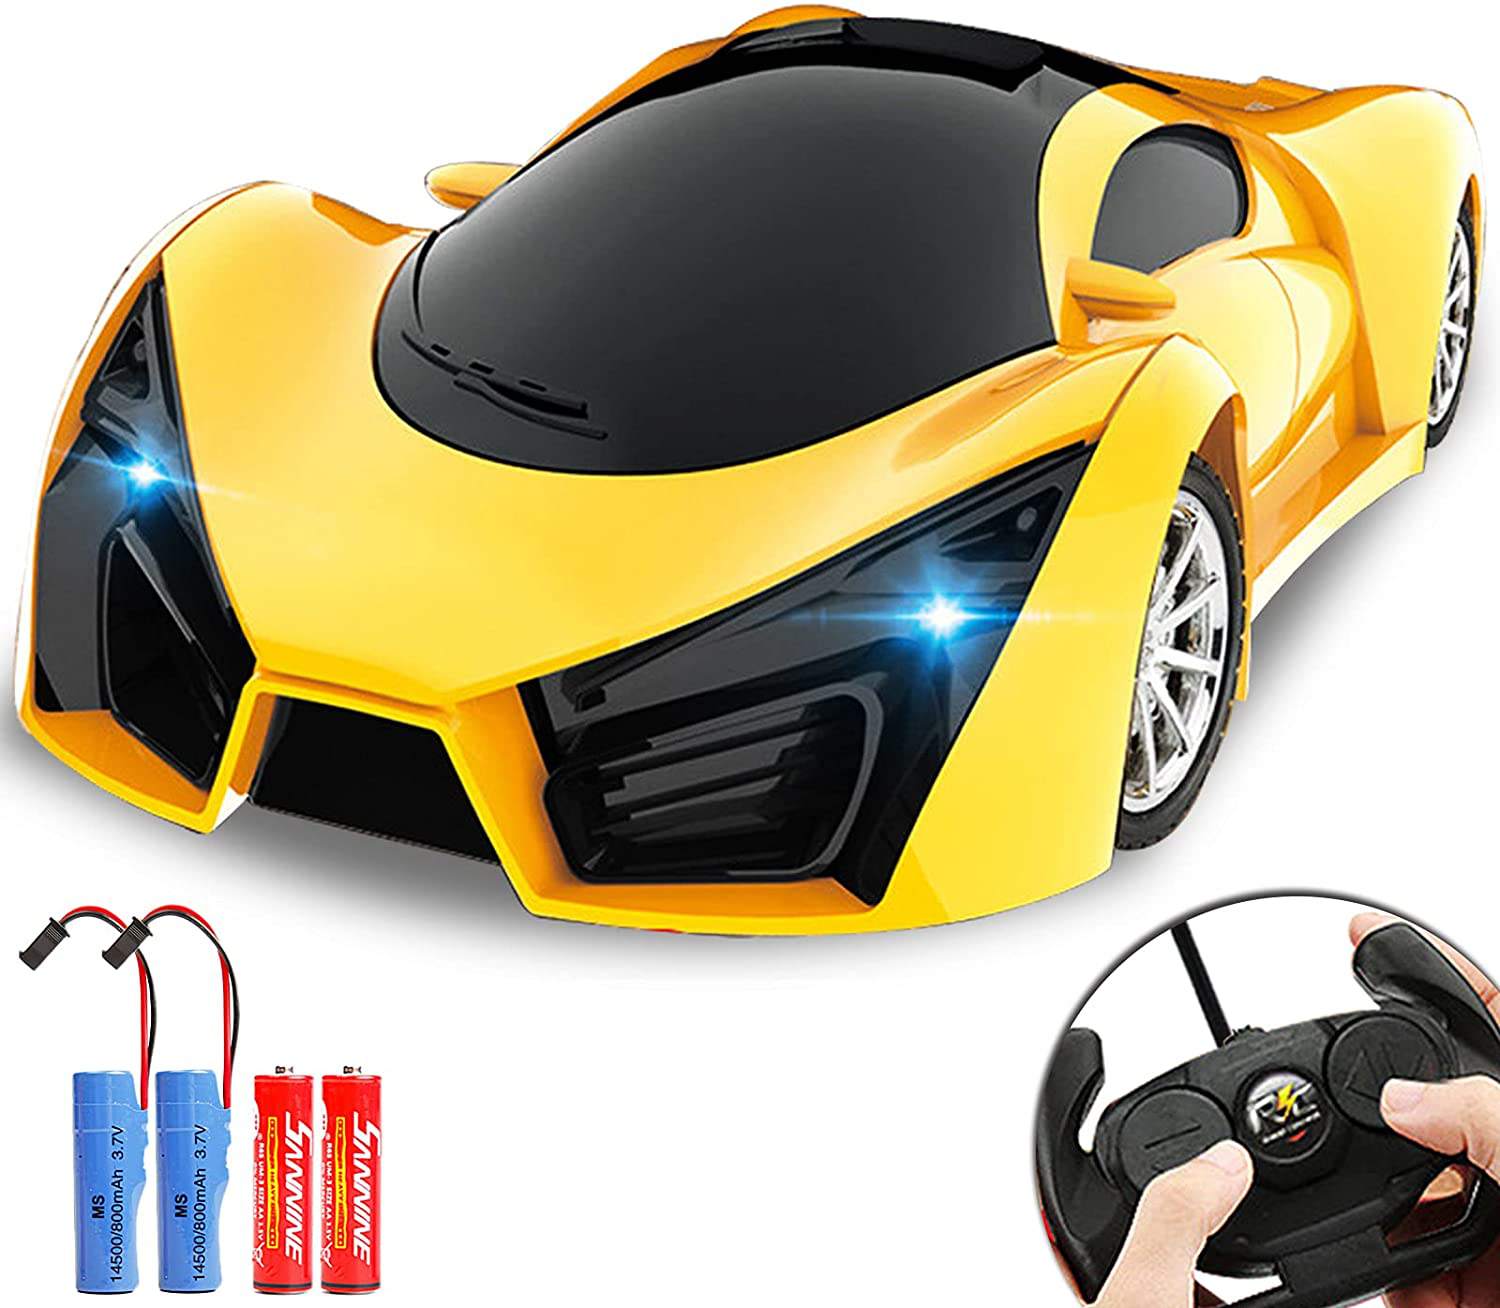 KULARIWORLD Remote Control Car, Rechargeable Drift RC Cars Toys for Kids,1/16 Scale 10KMH High Speed Super Vehicle with Led Headlight,Yellow Racing Hobby Best Xmas Birthday Gift for Boys Girls